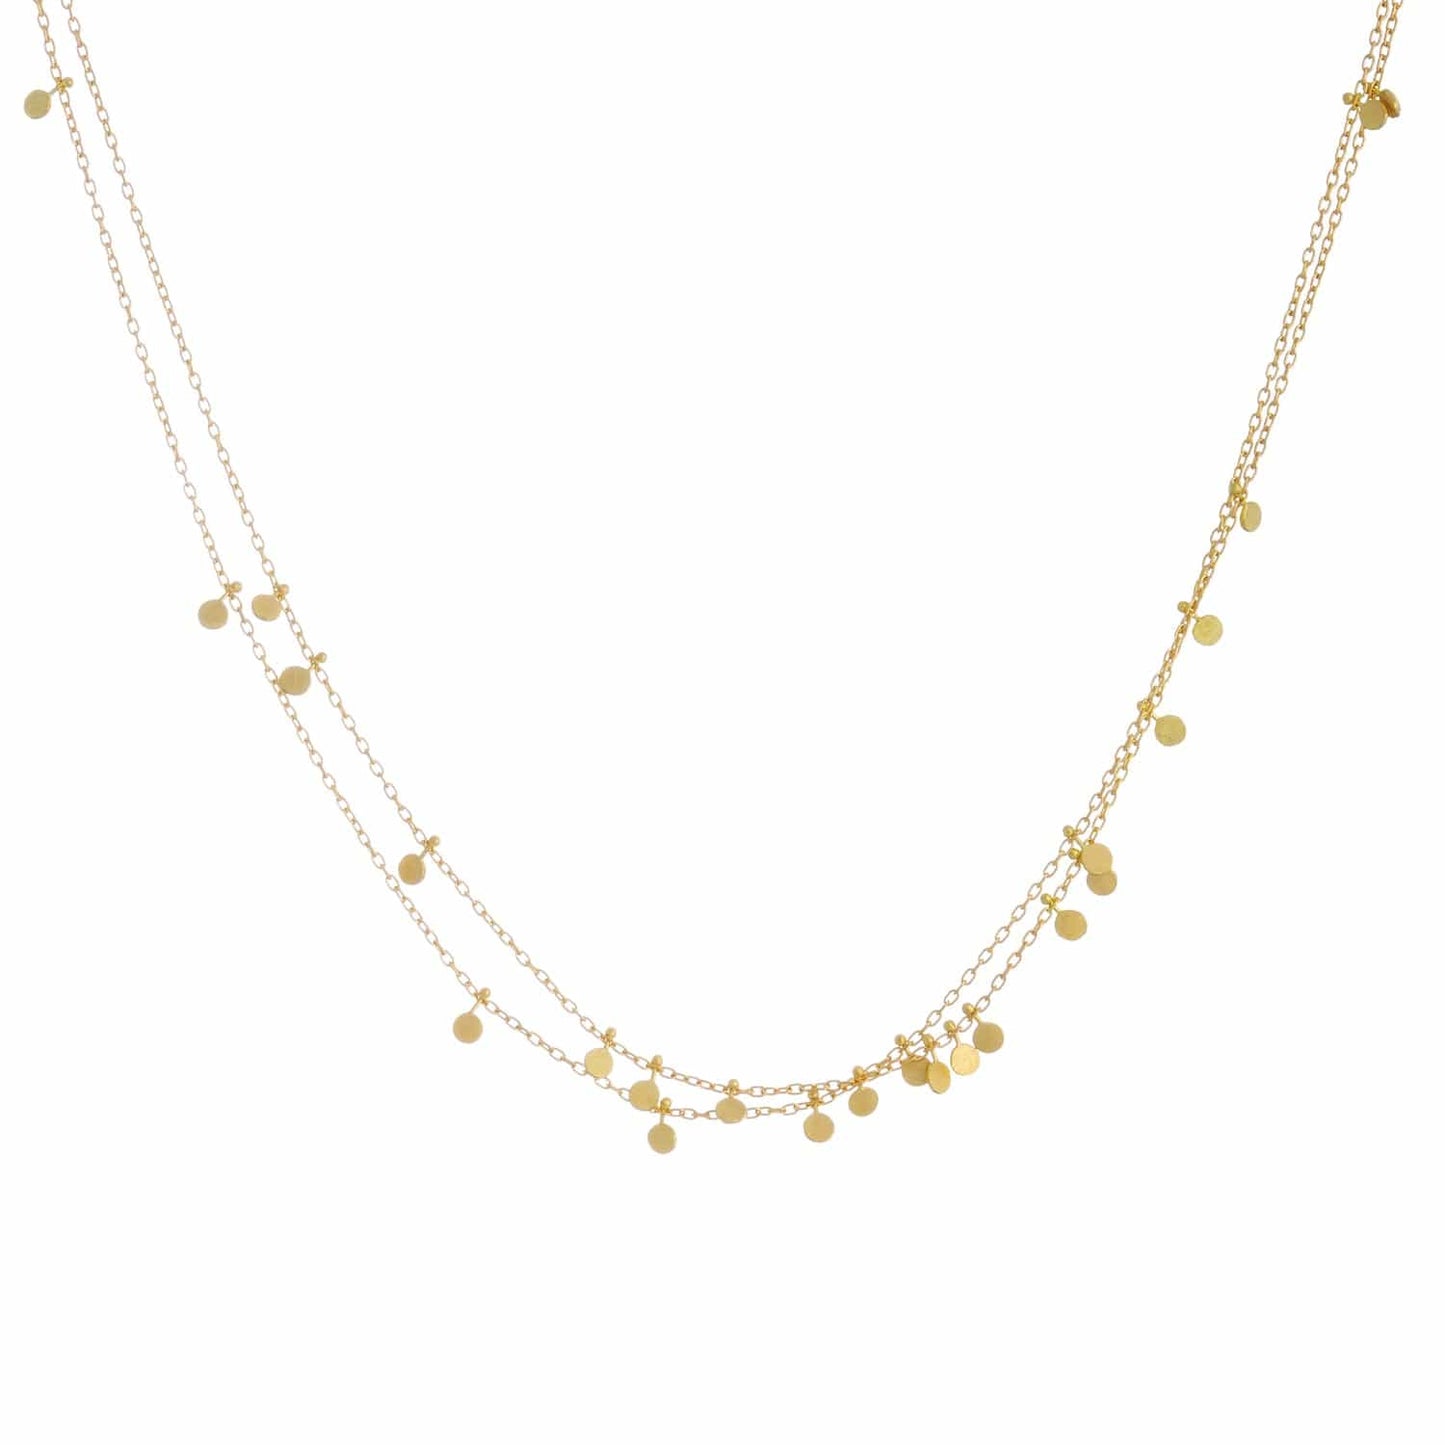 NKL-18K 18k Yellow Gold Tiny Dots Double Chain Necklace